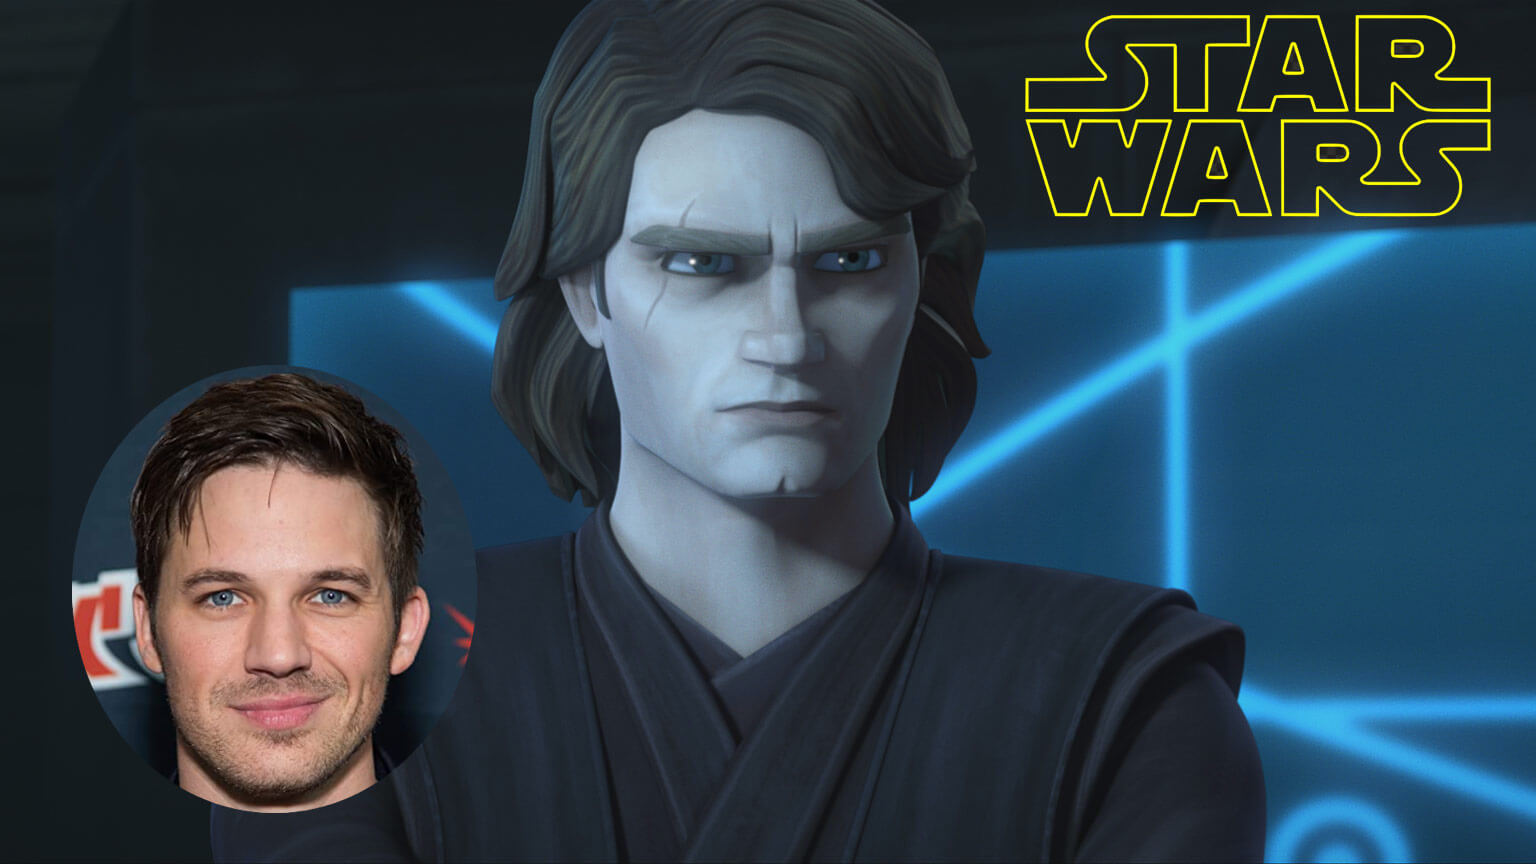 Matt Lanter Says He’s Not Done Playing Anakin Skywalker Just Yet, Teases Future Projects